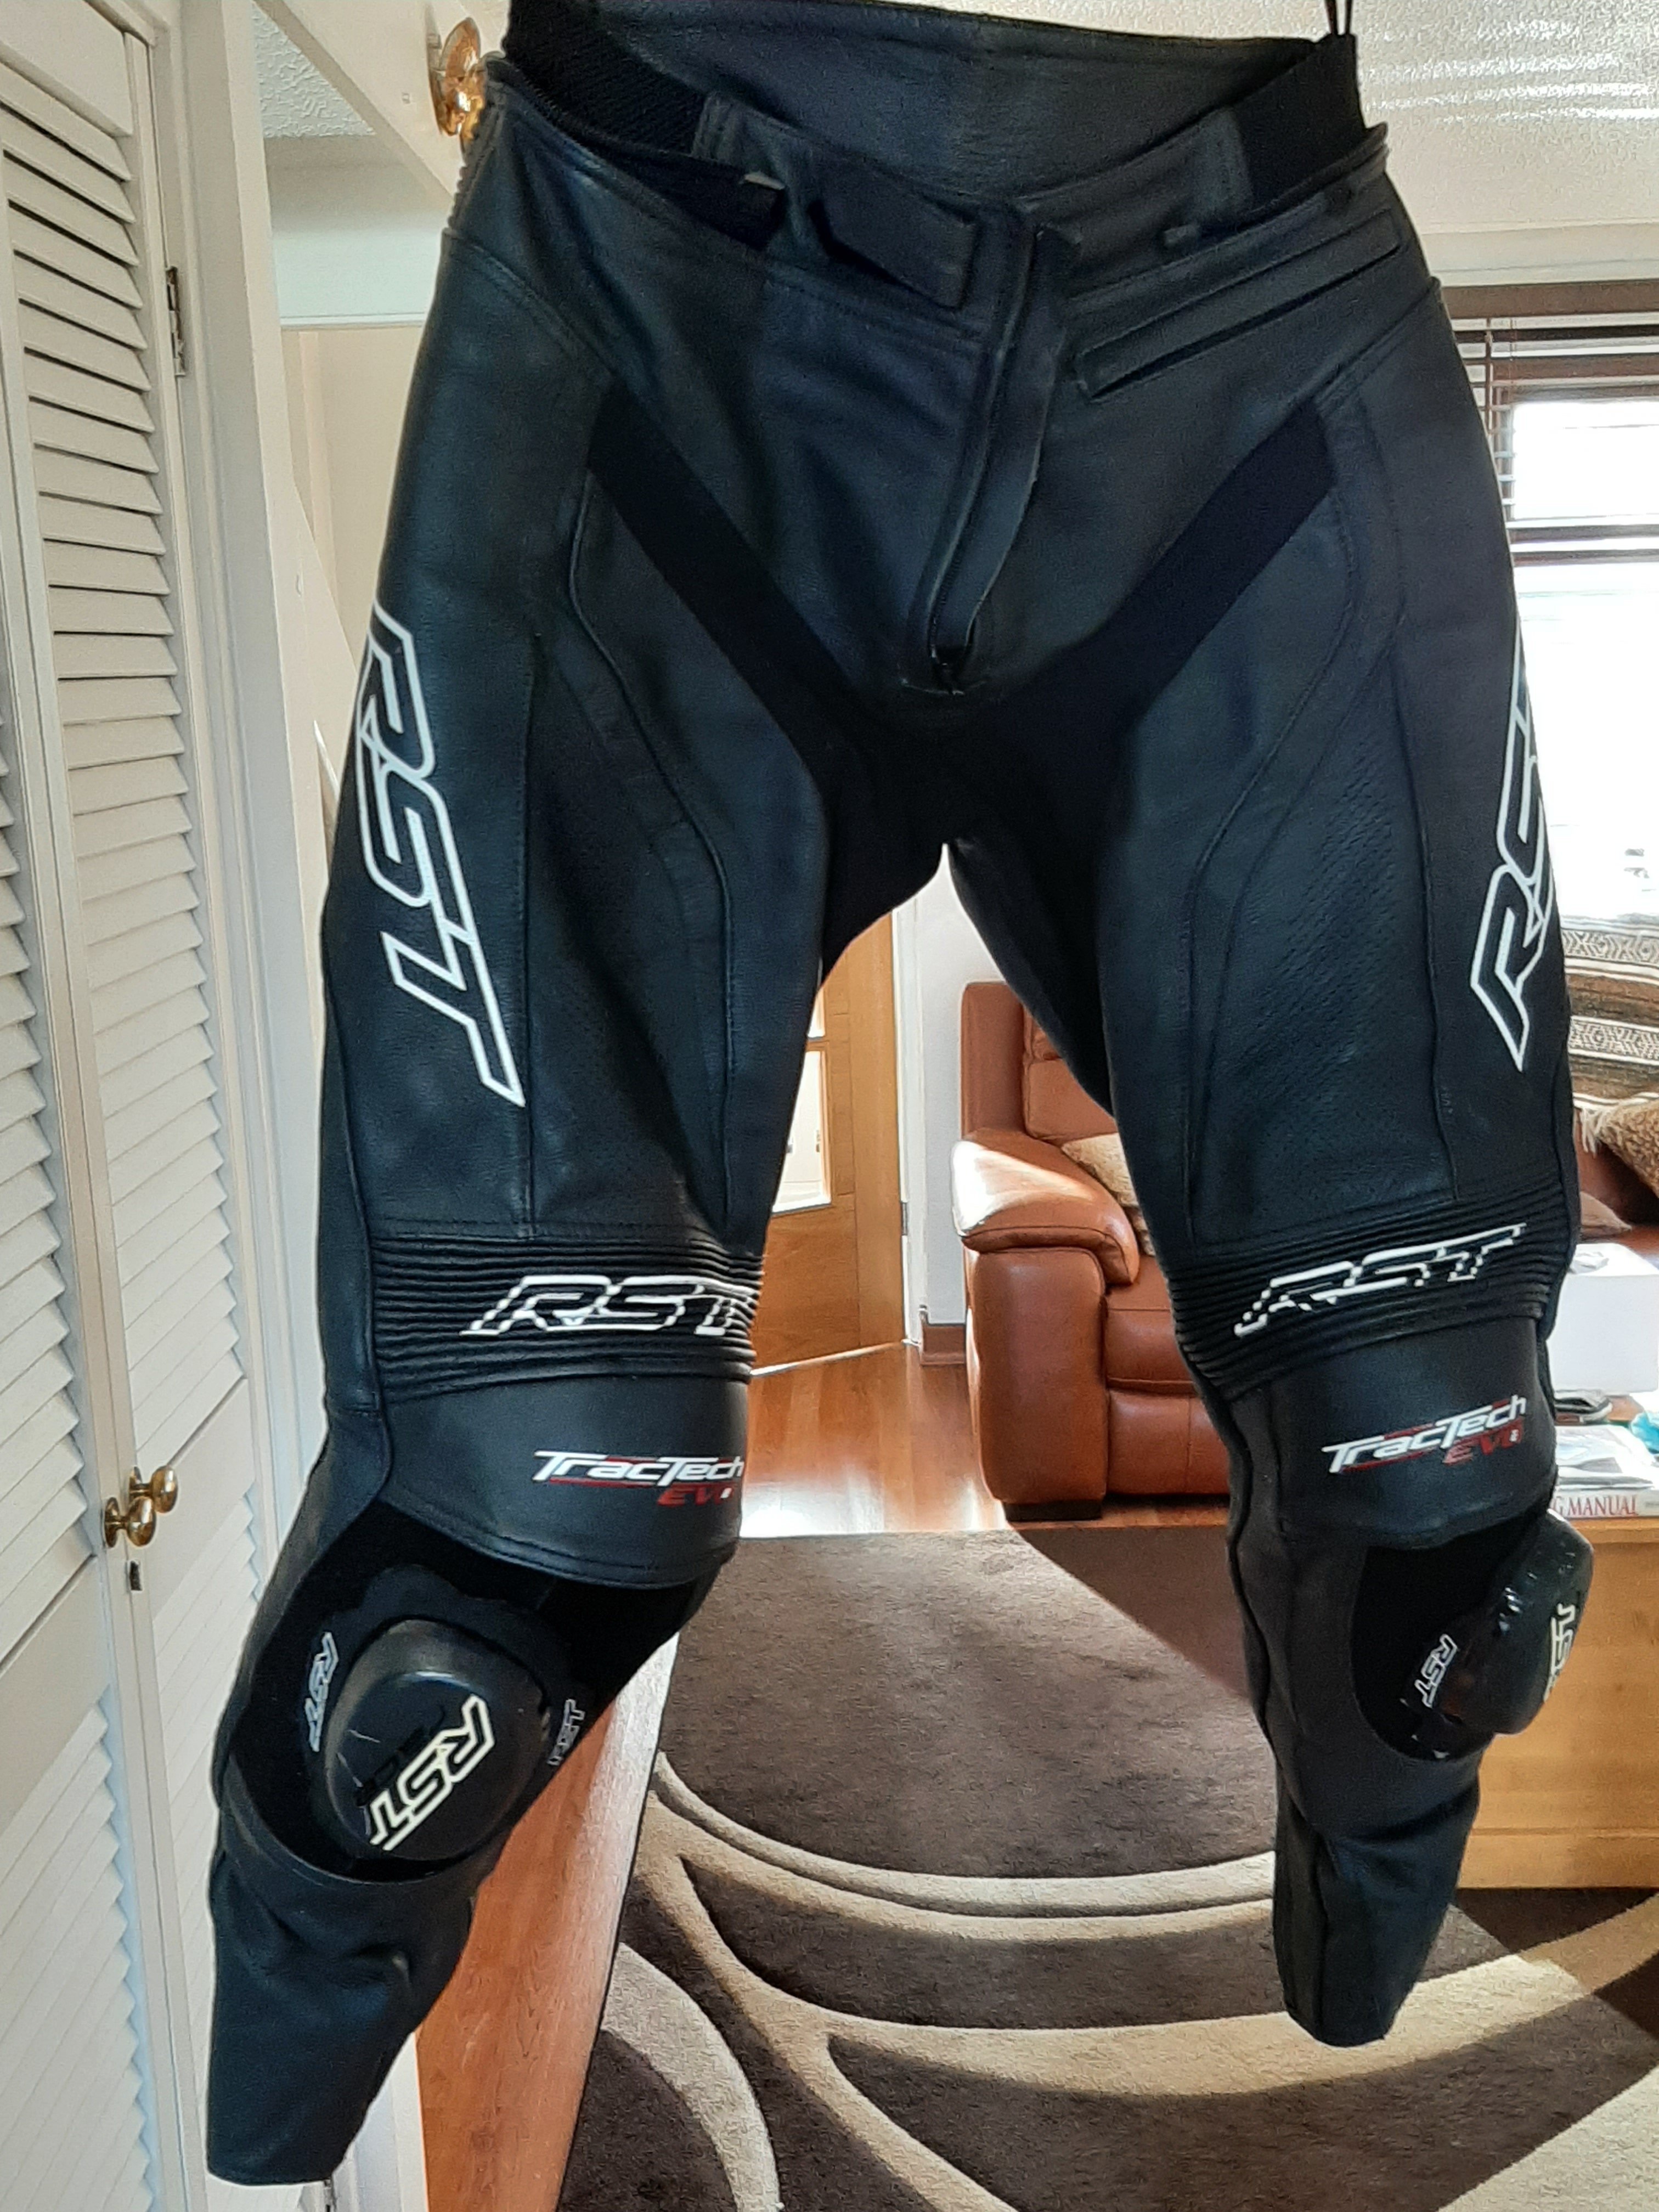 RST Tracktec 2 trousers front.jpg